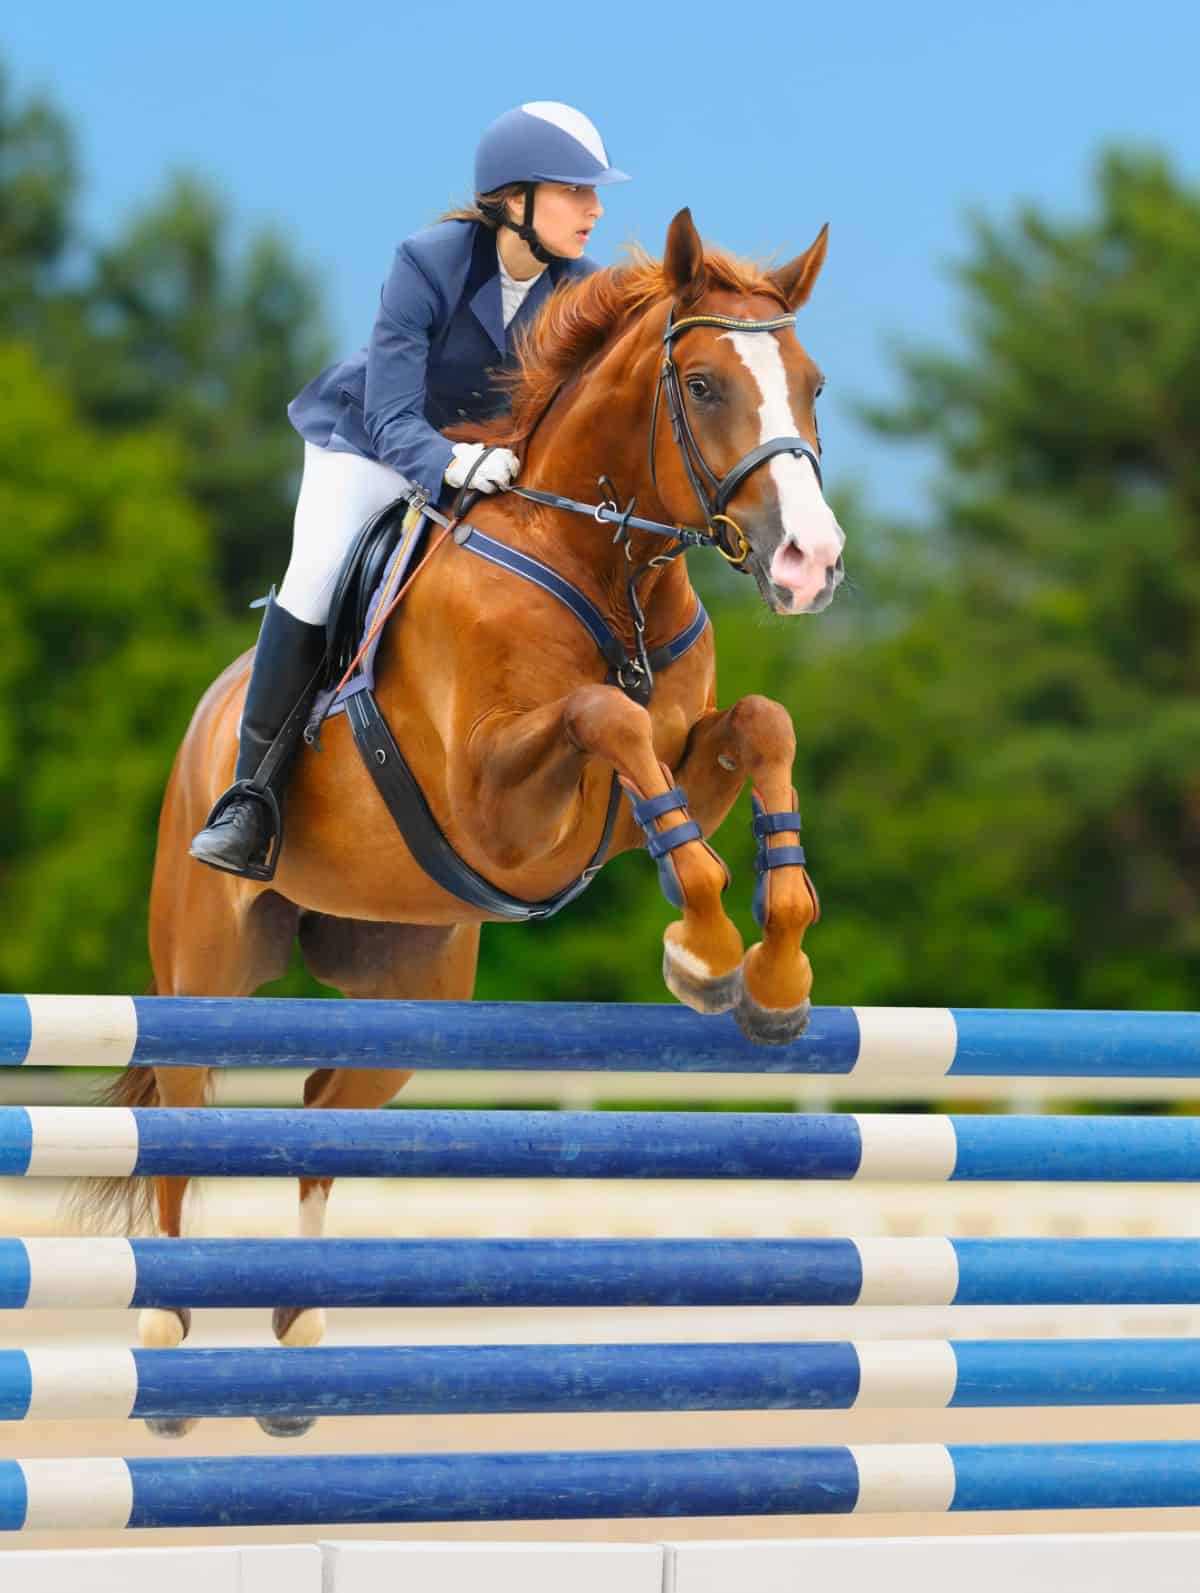 brown horse jumping over blue bars